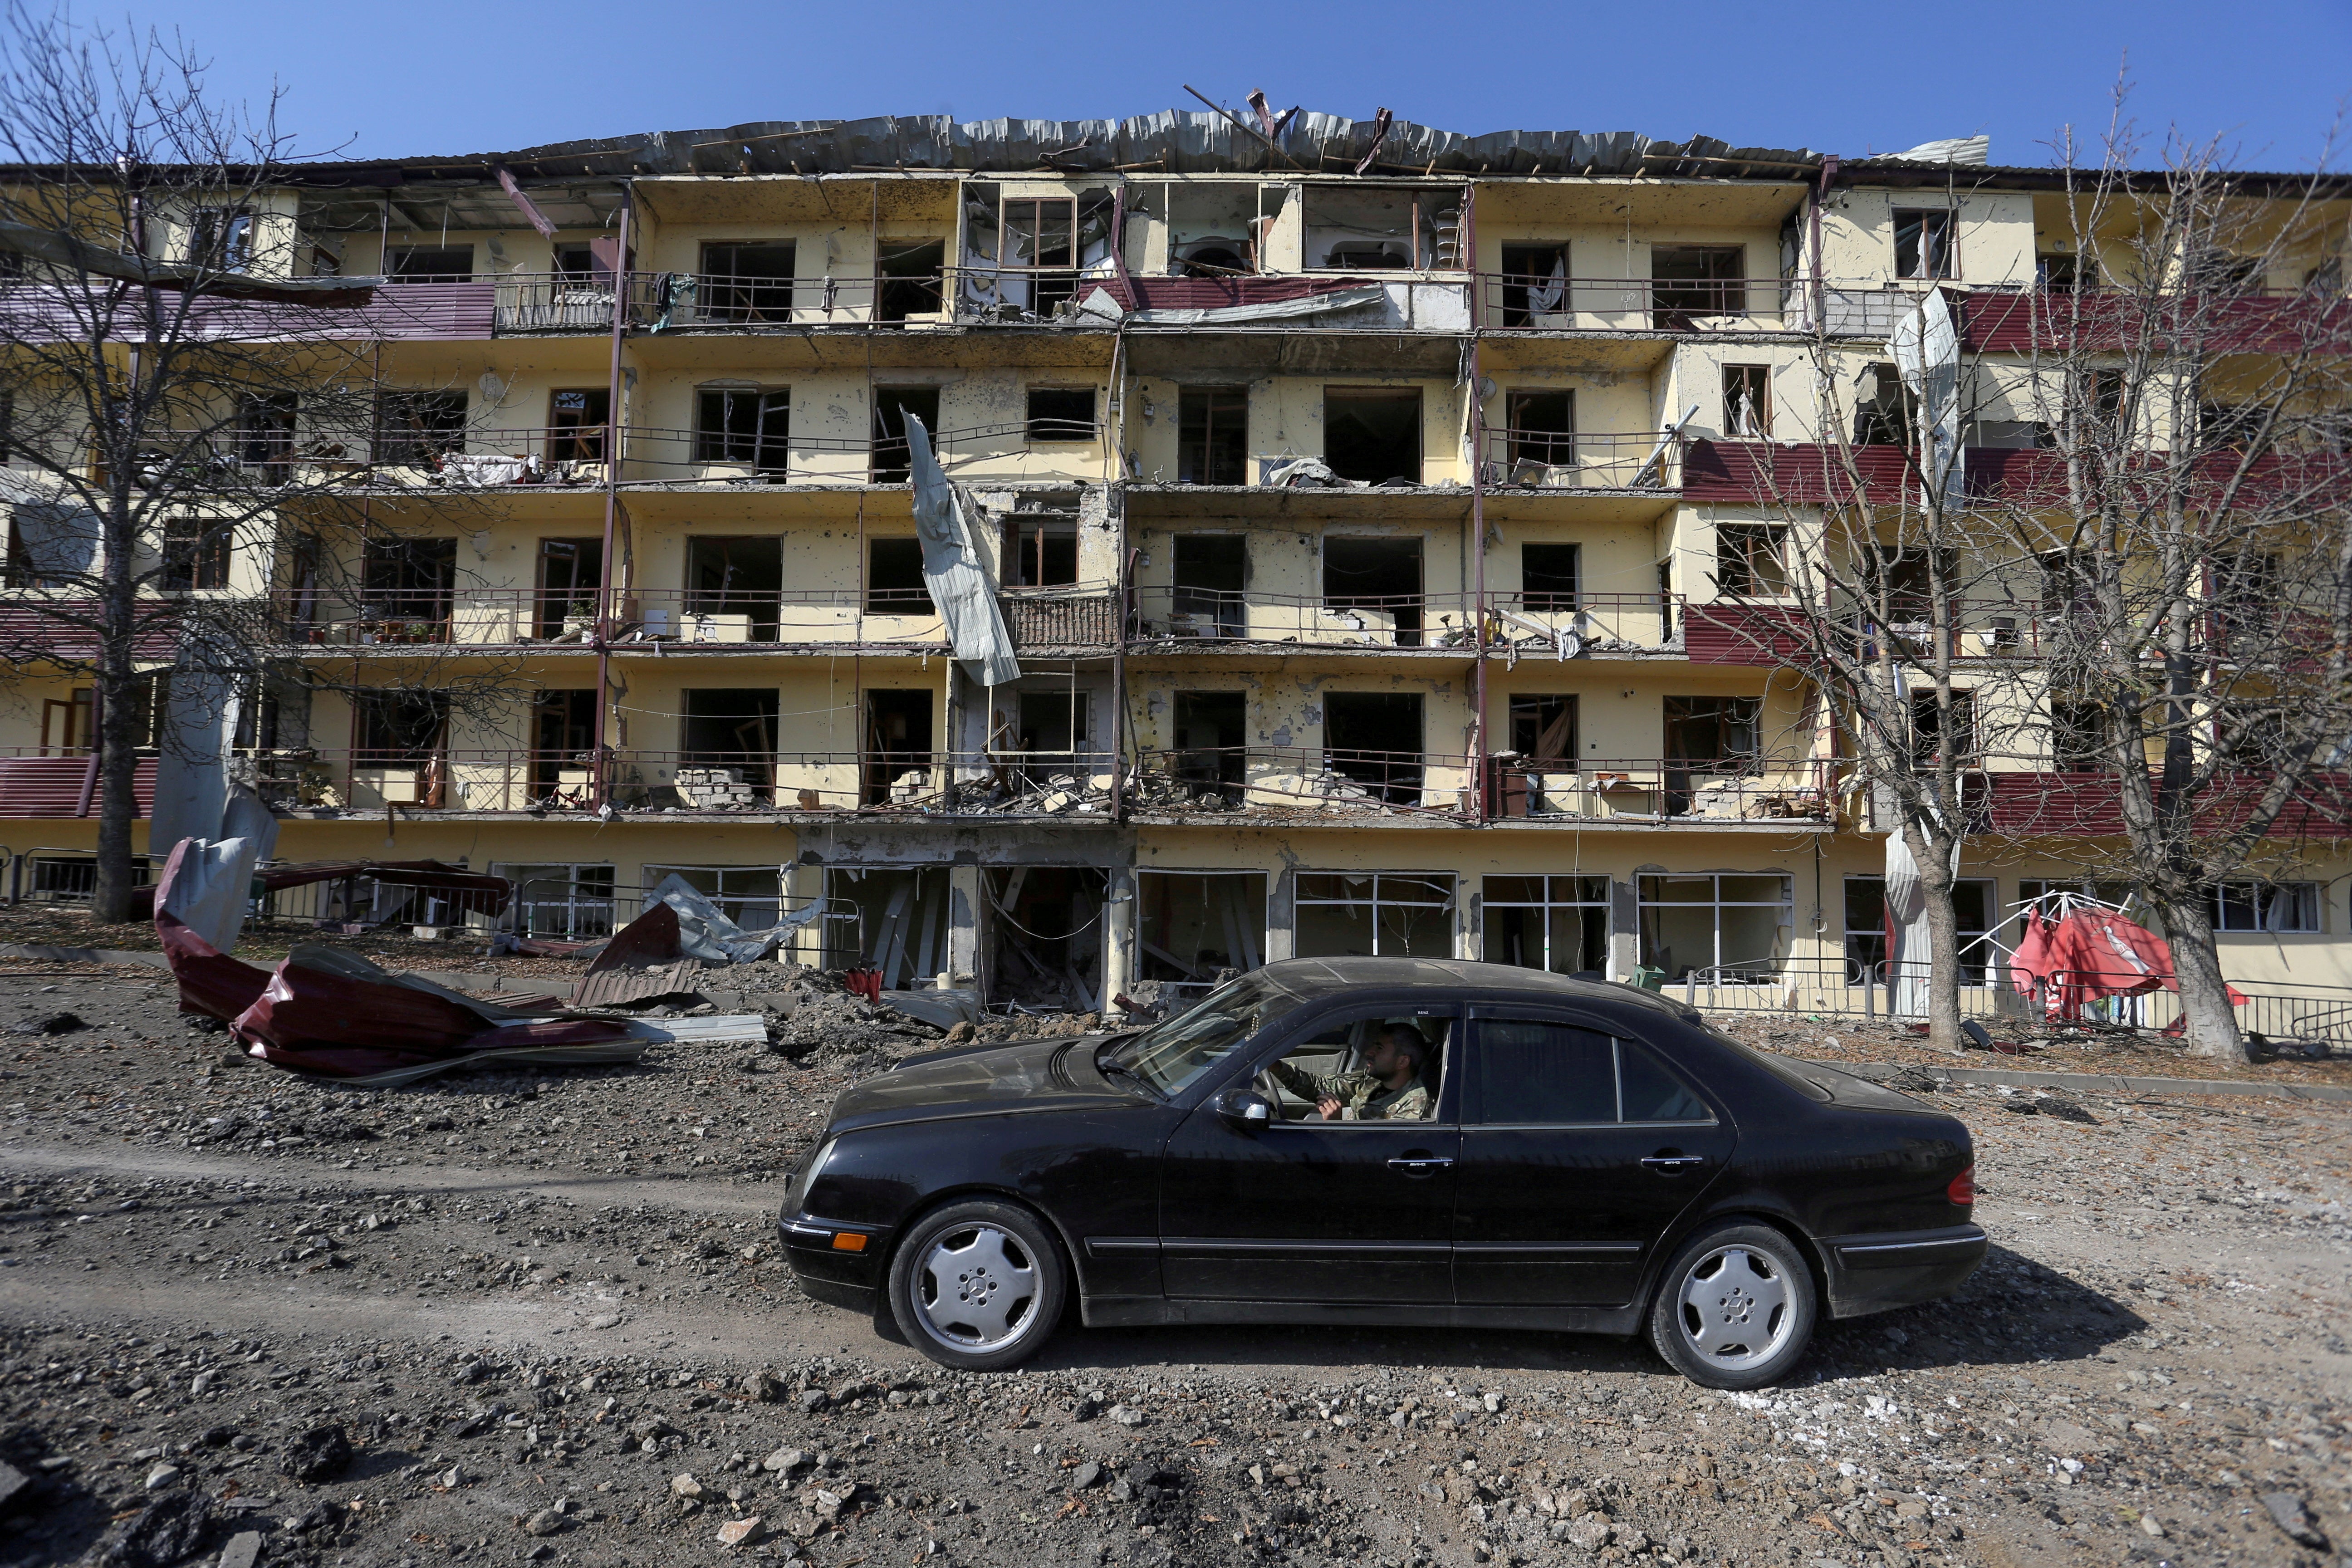 A man drives a car past a damaged building following recent shelling in the town of Shushi